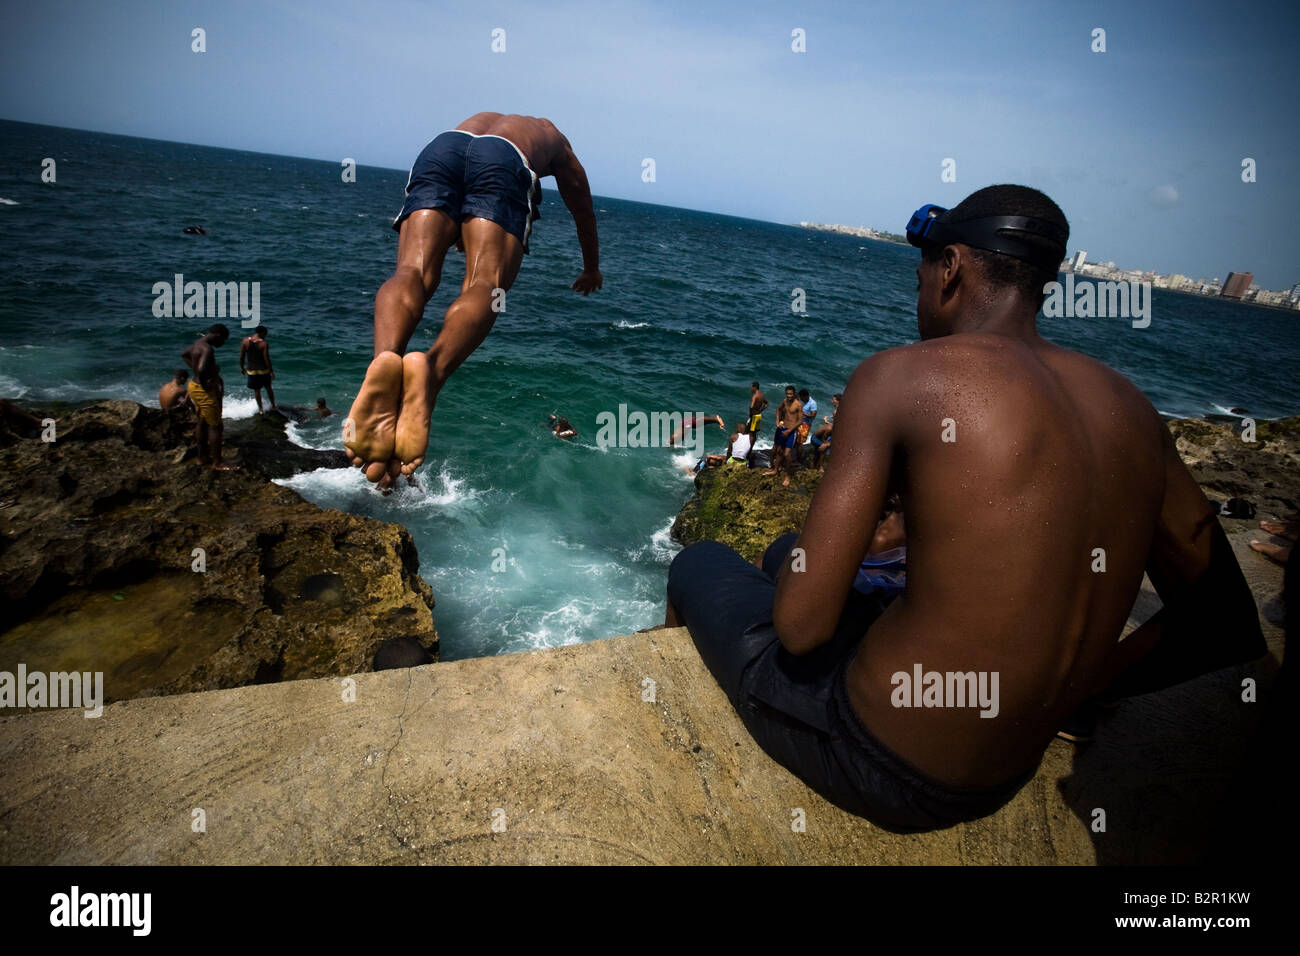 A teenager jumps off a concrete wall into the ocean along the Malecon avenue in Havana Cuba on Saturday June 28 2008 Stock Photo